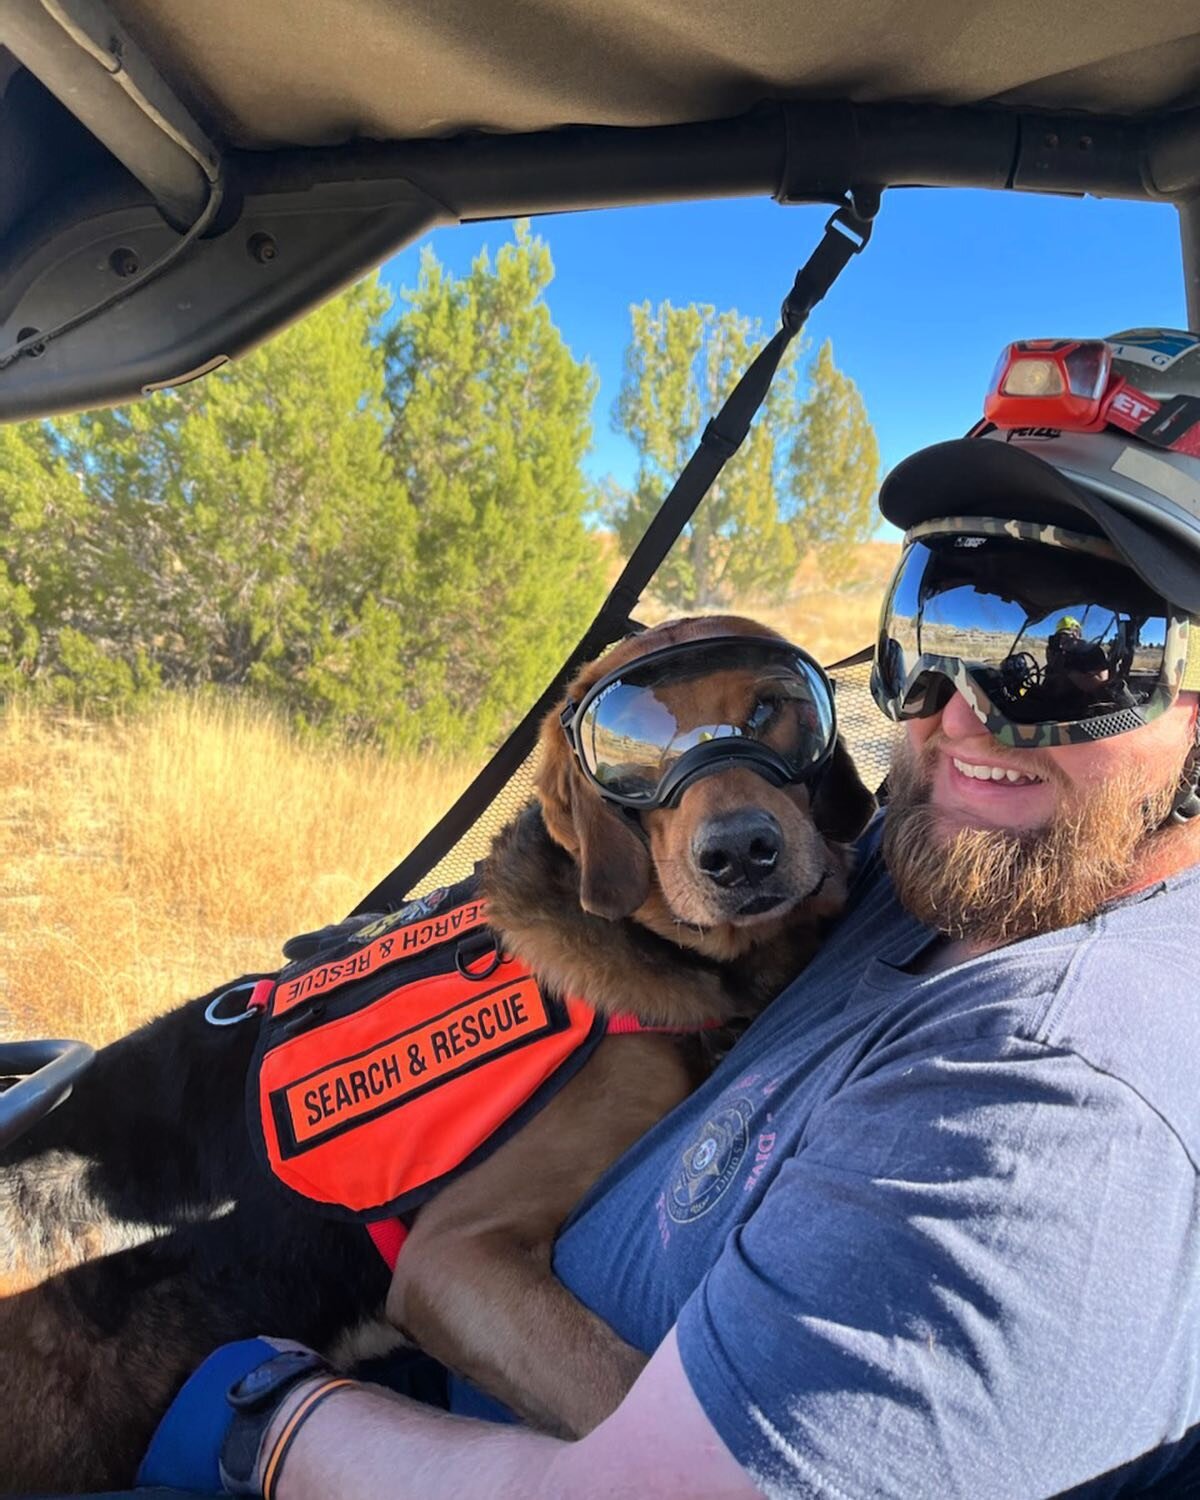 ATV training out in the field today with K9 Boojum and Reese. We strive to be ready for all types of different scenarios out here in the west. 

#sardog #sark9 #trailing #tracking #trackingdog #searchandrescue #colorado #training #pnw #wyoming #dogso